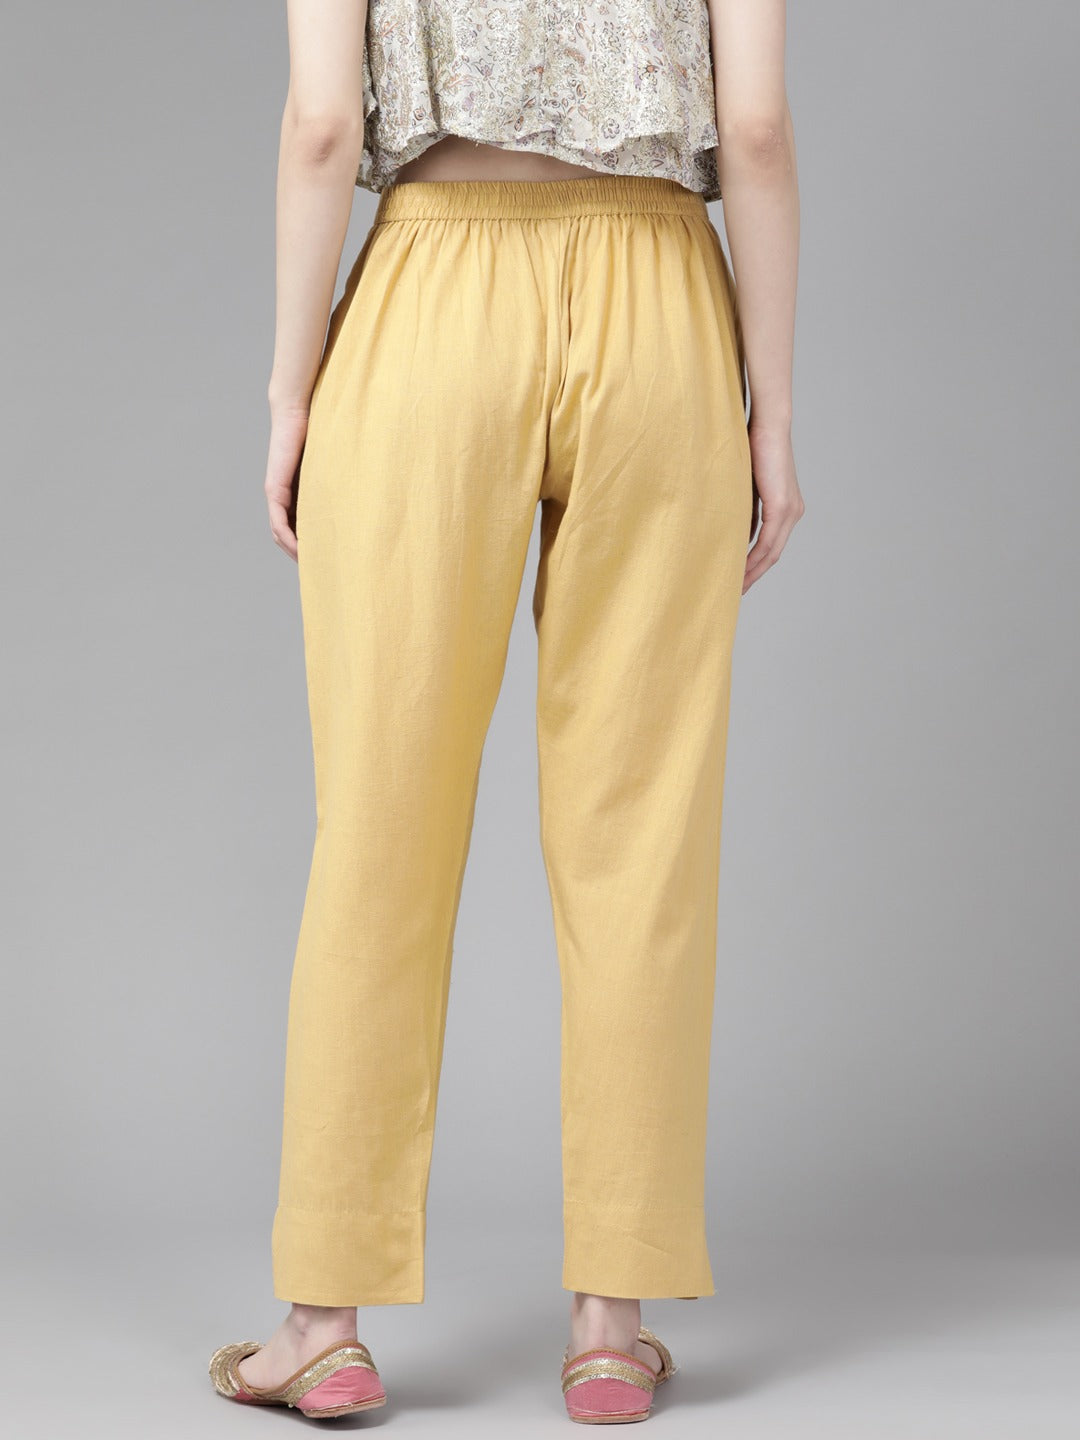 Beige Straight Trousers-Yufta Store-4206PNTBGS